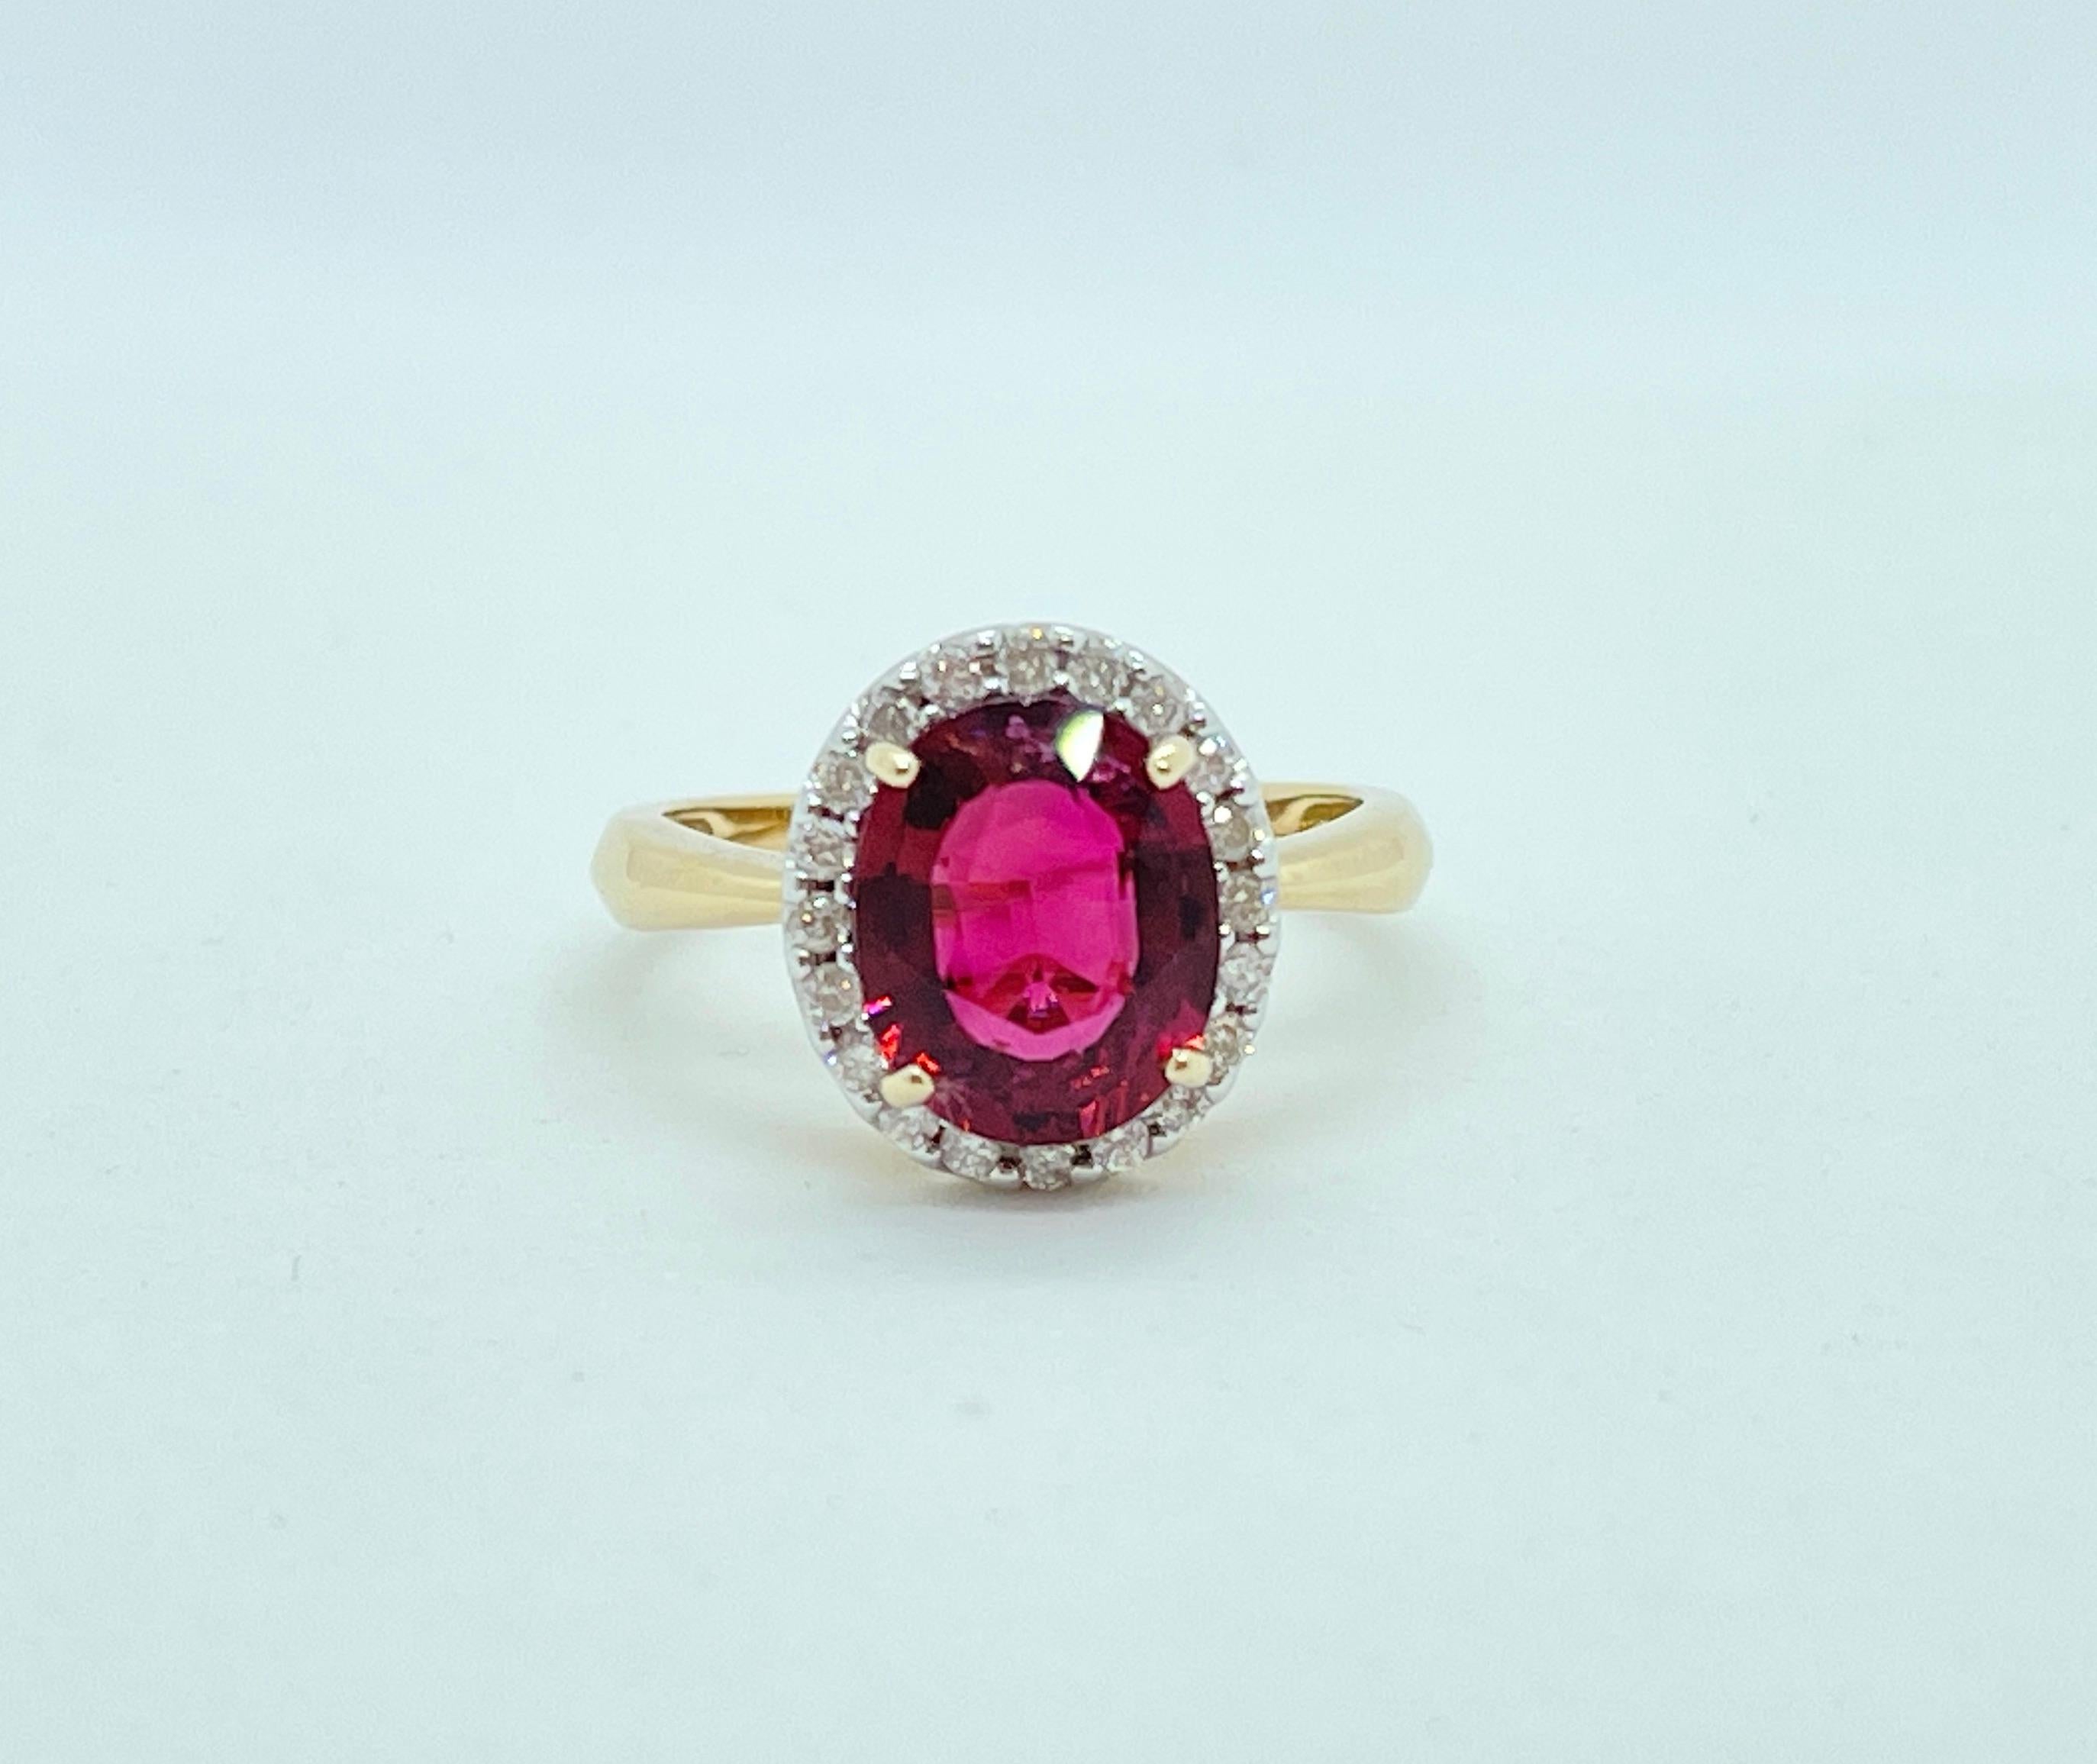 Genuine Natural Rubellite Tourmaline Diamond Halo Ring 9ct Yellow Gold Valuation For Sale 4